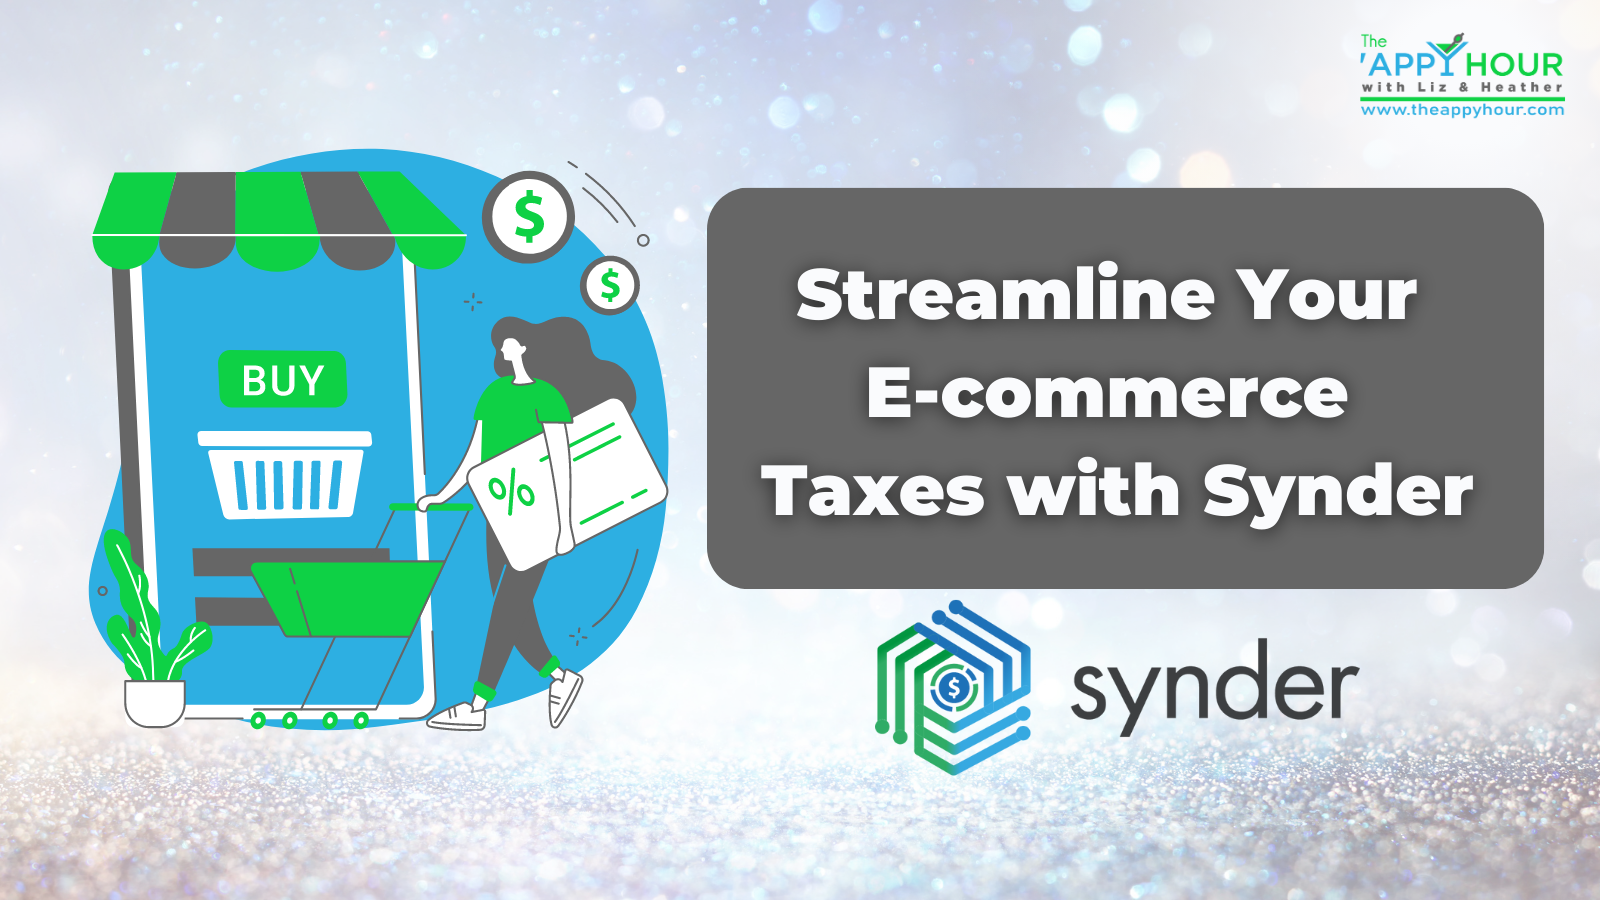 Streamline Your E-commerce Taxes with Synder